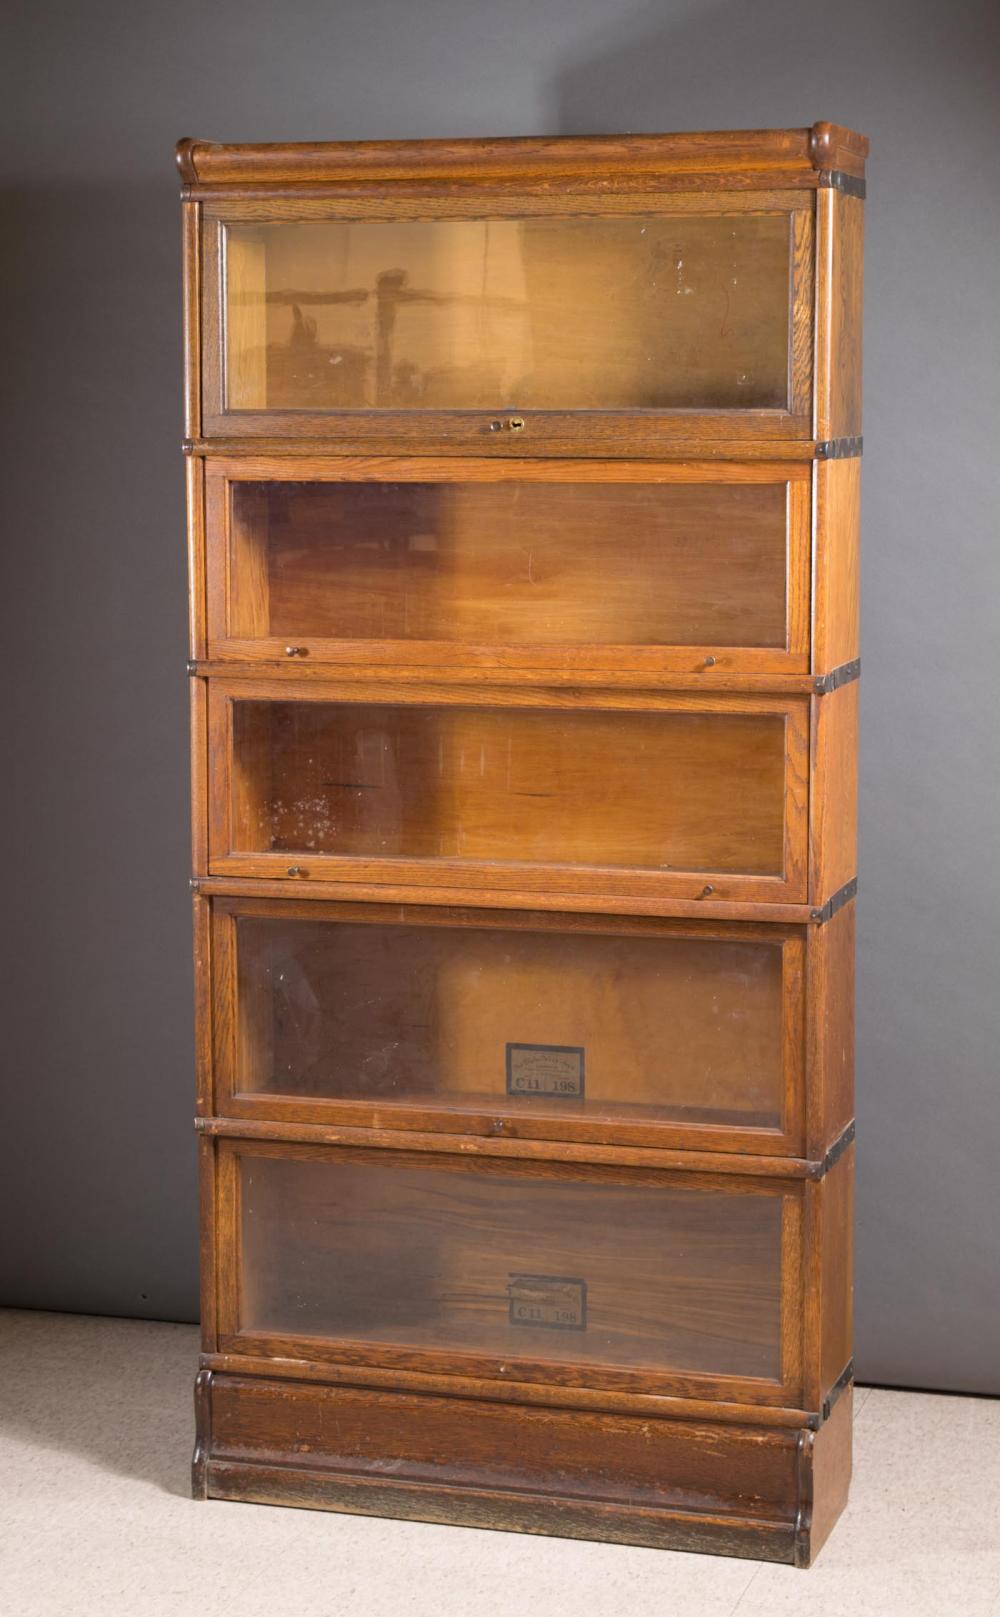 FIVE SECTION STACKING OAK BOOKCASEFIVE SECTION 341e71